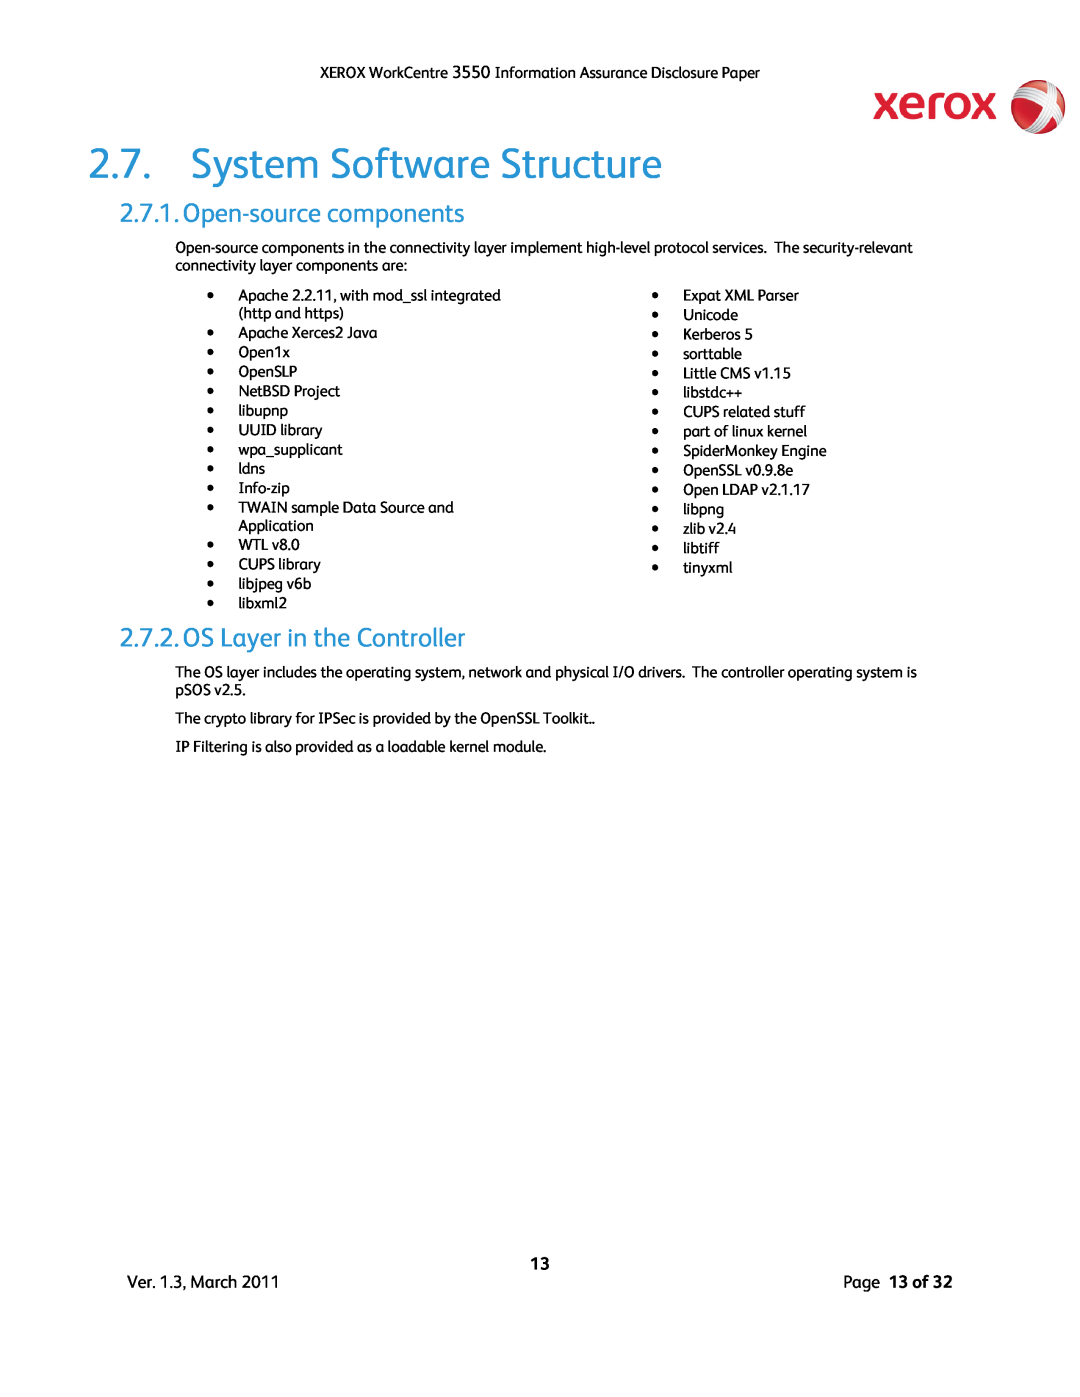 Xerox 3550 manual System Software Structure, Open-sourcecomponents, OS Layer in the Controller 